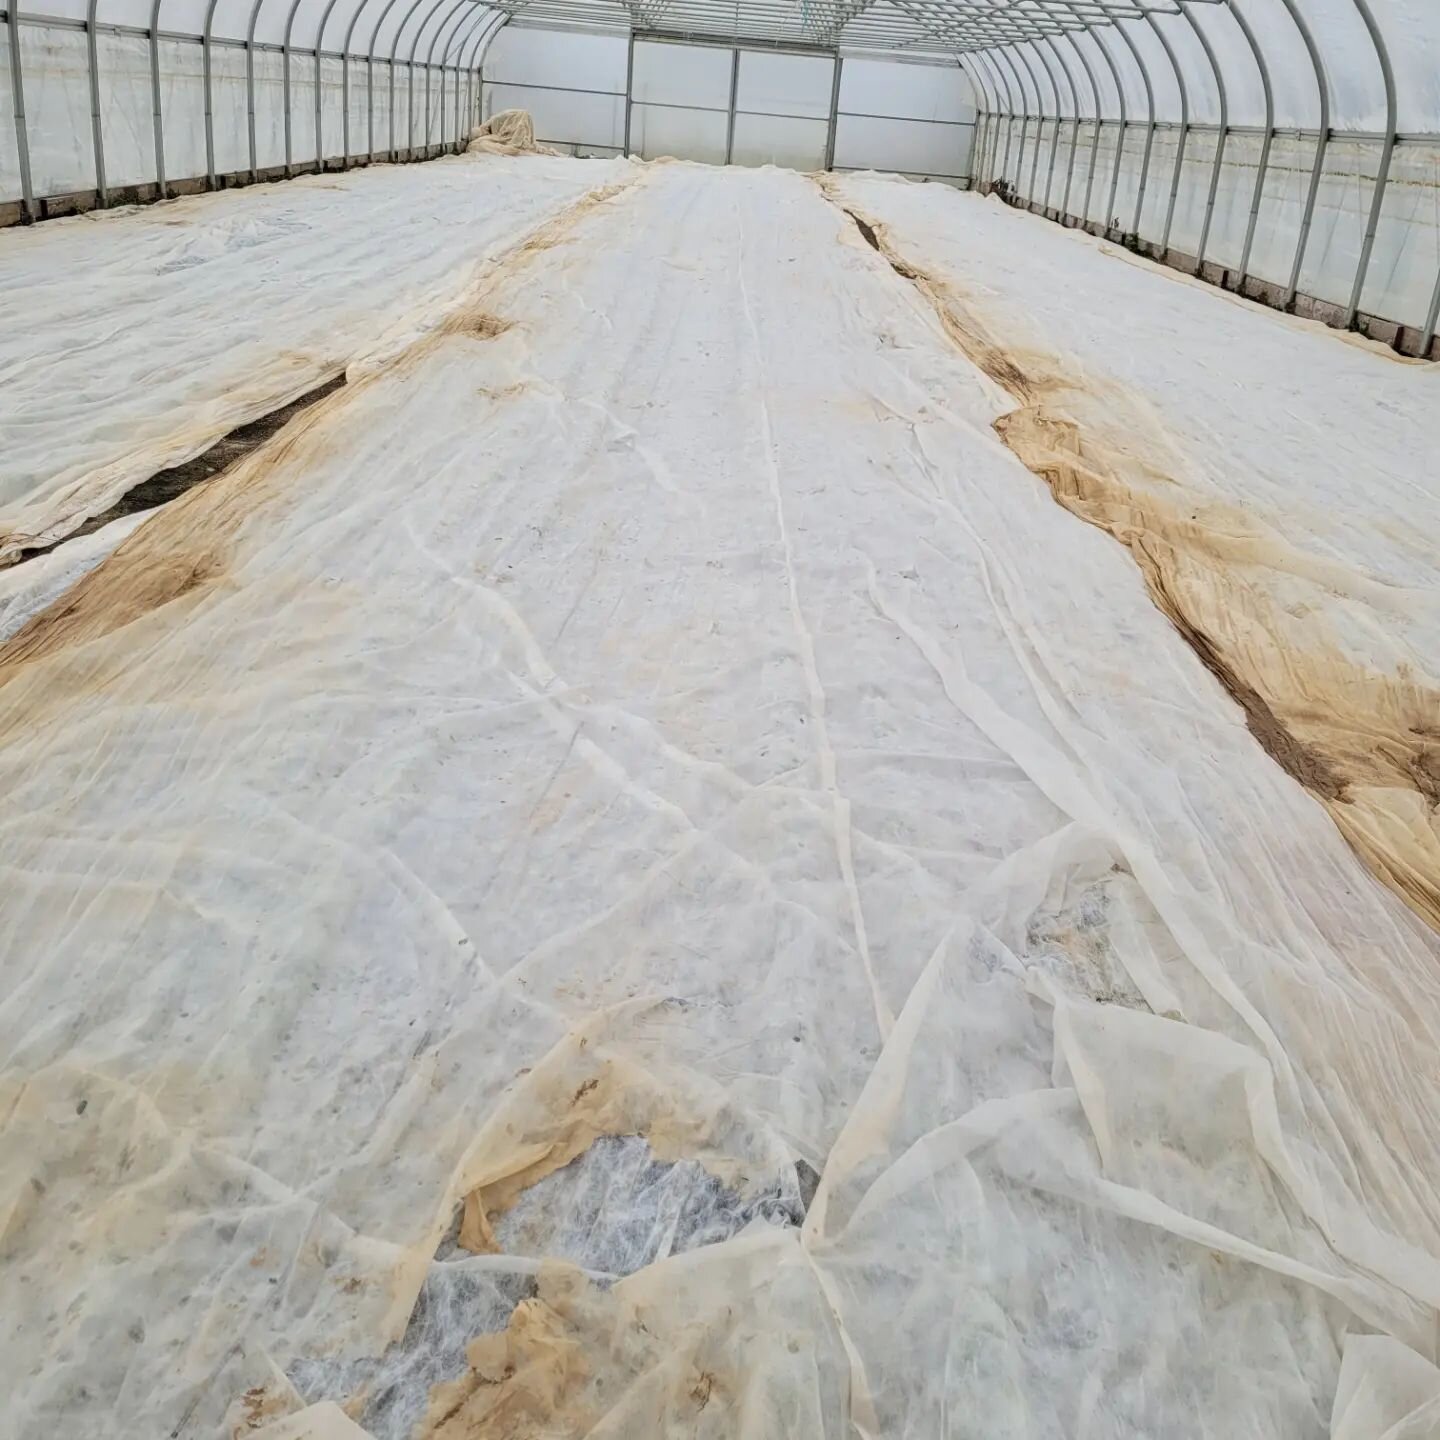 Double row covers over the high tunnel veggies, ✔️ Animals all cozy in their winter quarters, ✔️ Hoses drained, ✔️

Like most farms, this week has been a flurry of preparation getting things covered and pens constructed before the cold front comes th